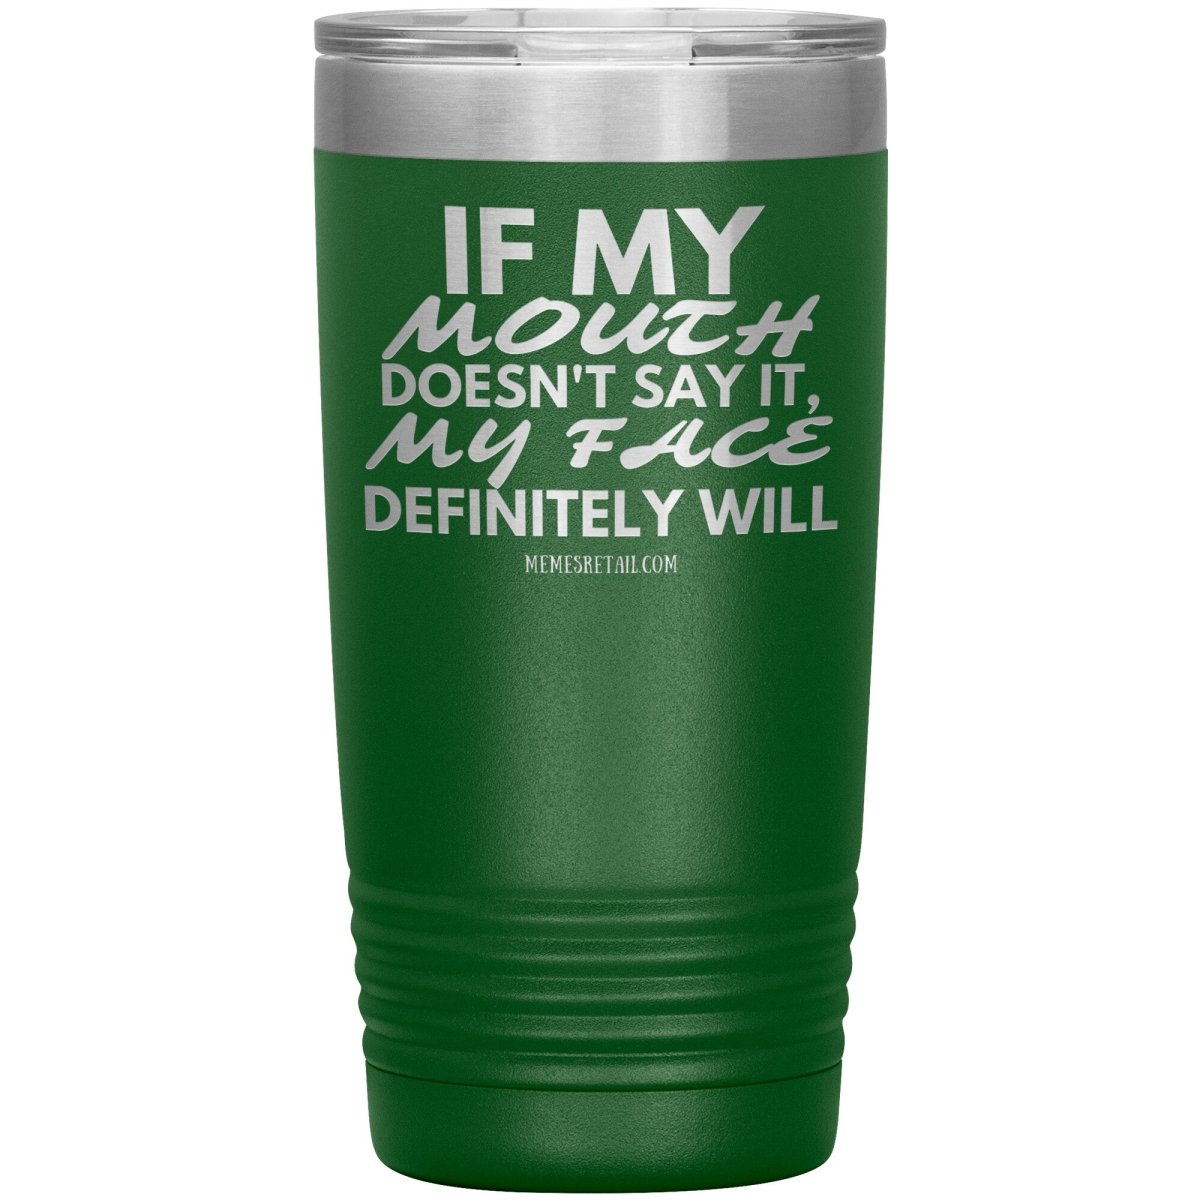 If my mouth doesn't say it, my face definitely will Tumblers, 20oz Insulated Tumbler / Green - MemesRetail.com